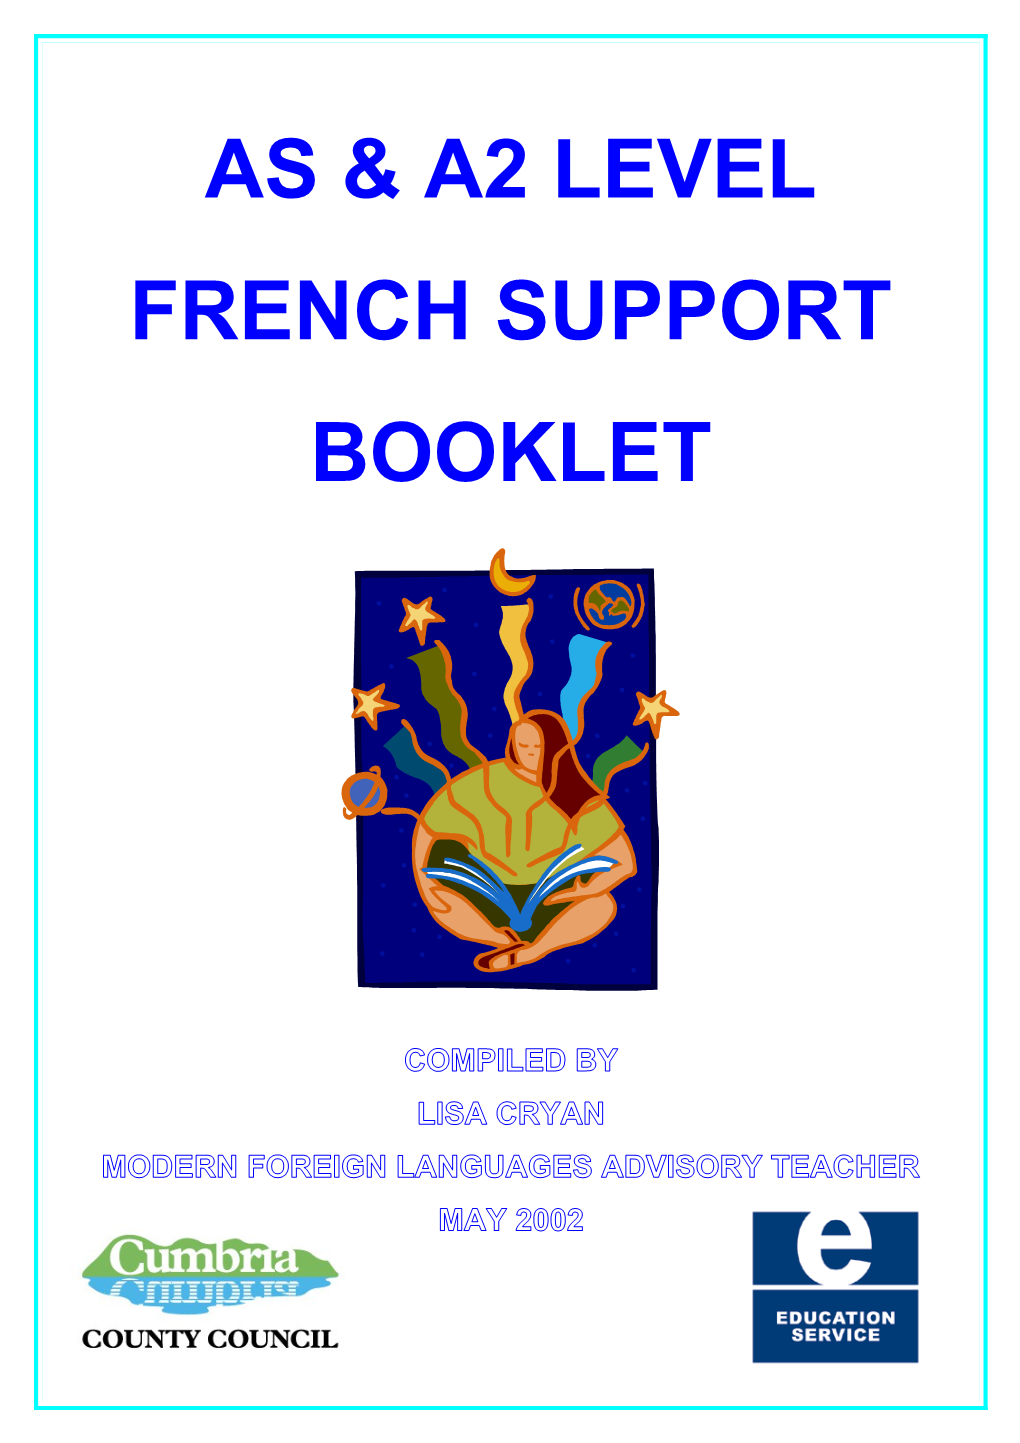 As & A2 Level French Support Booklet